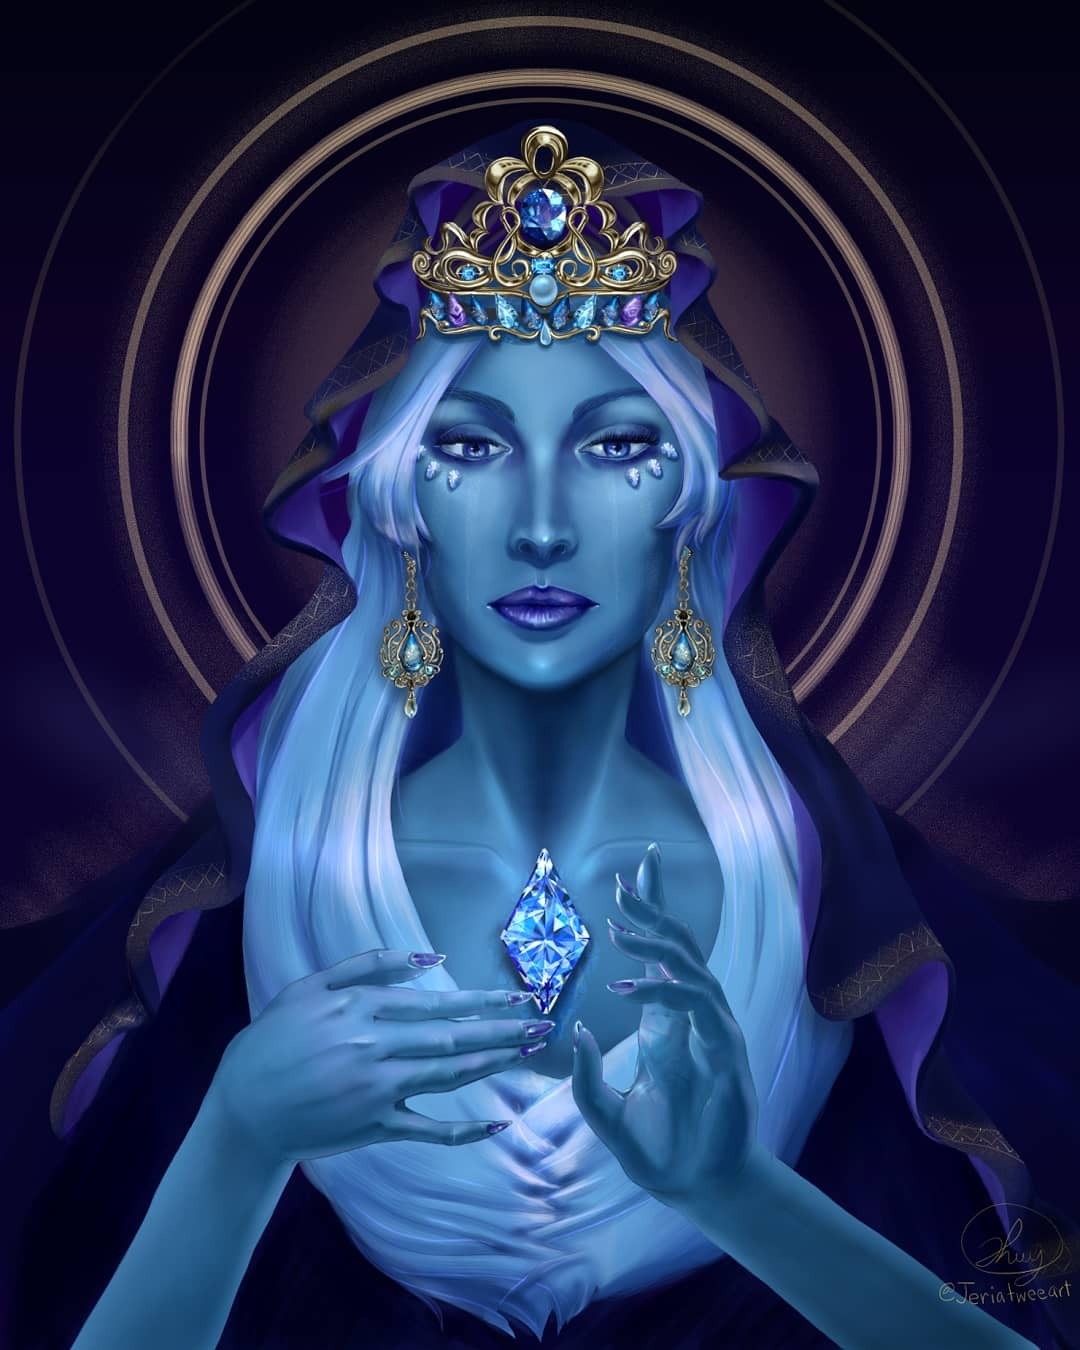 Steven Universe - Blue Diamond and Her Court I painted her like an ancient Royal queen or deity, wearing all the gems of her court: Sapphire, lapis lazuli, aquamarine, blue zircon, Holly blue agate,...